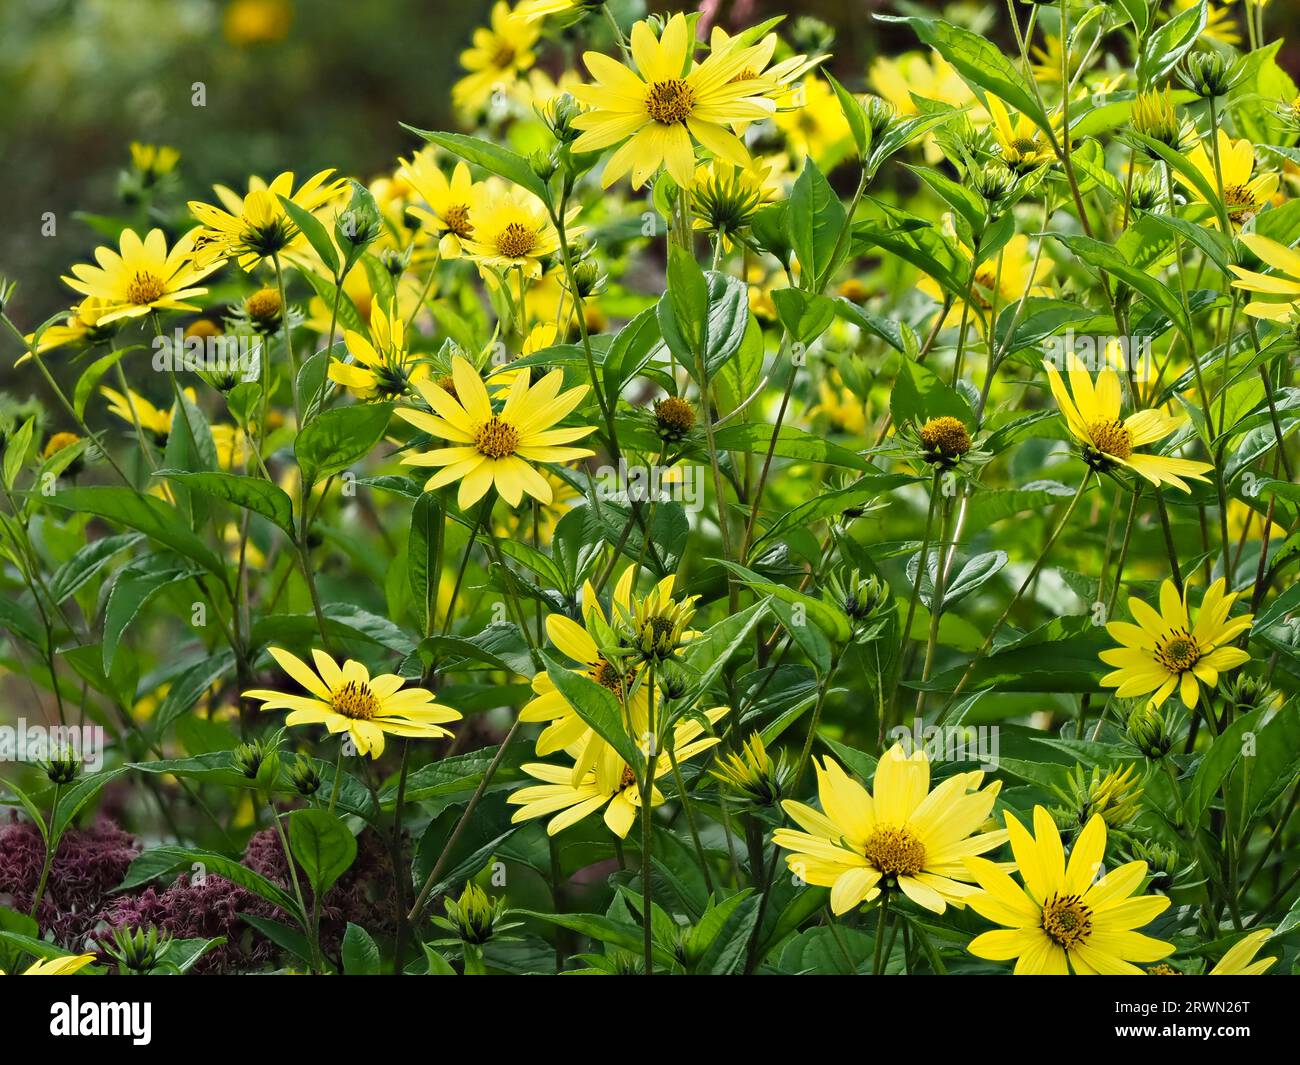 Lemon yellow flowers of the tall growing, late summer to early Autumn flowering perennial, Helianthus 'Lemon Queen' Stock Photo